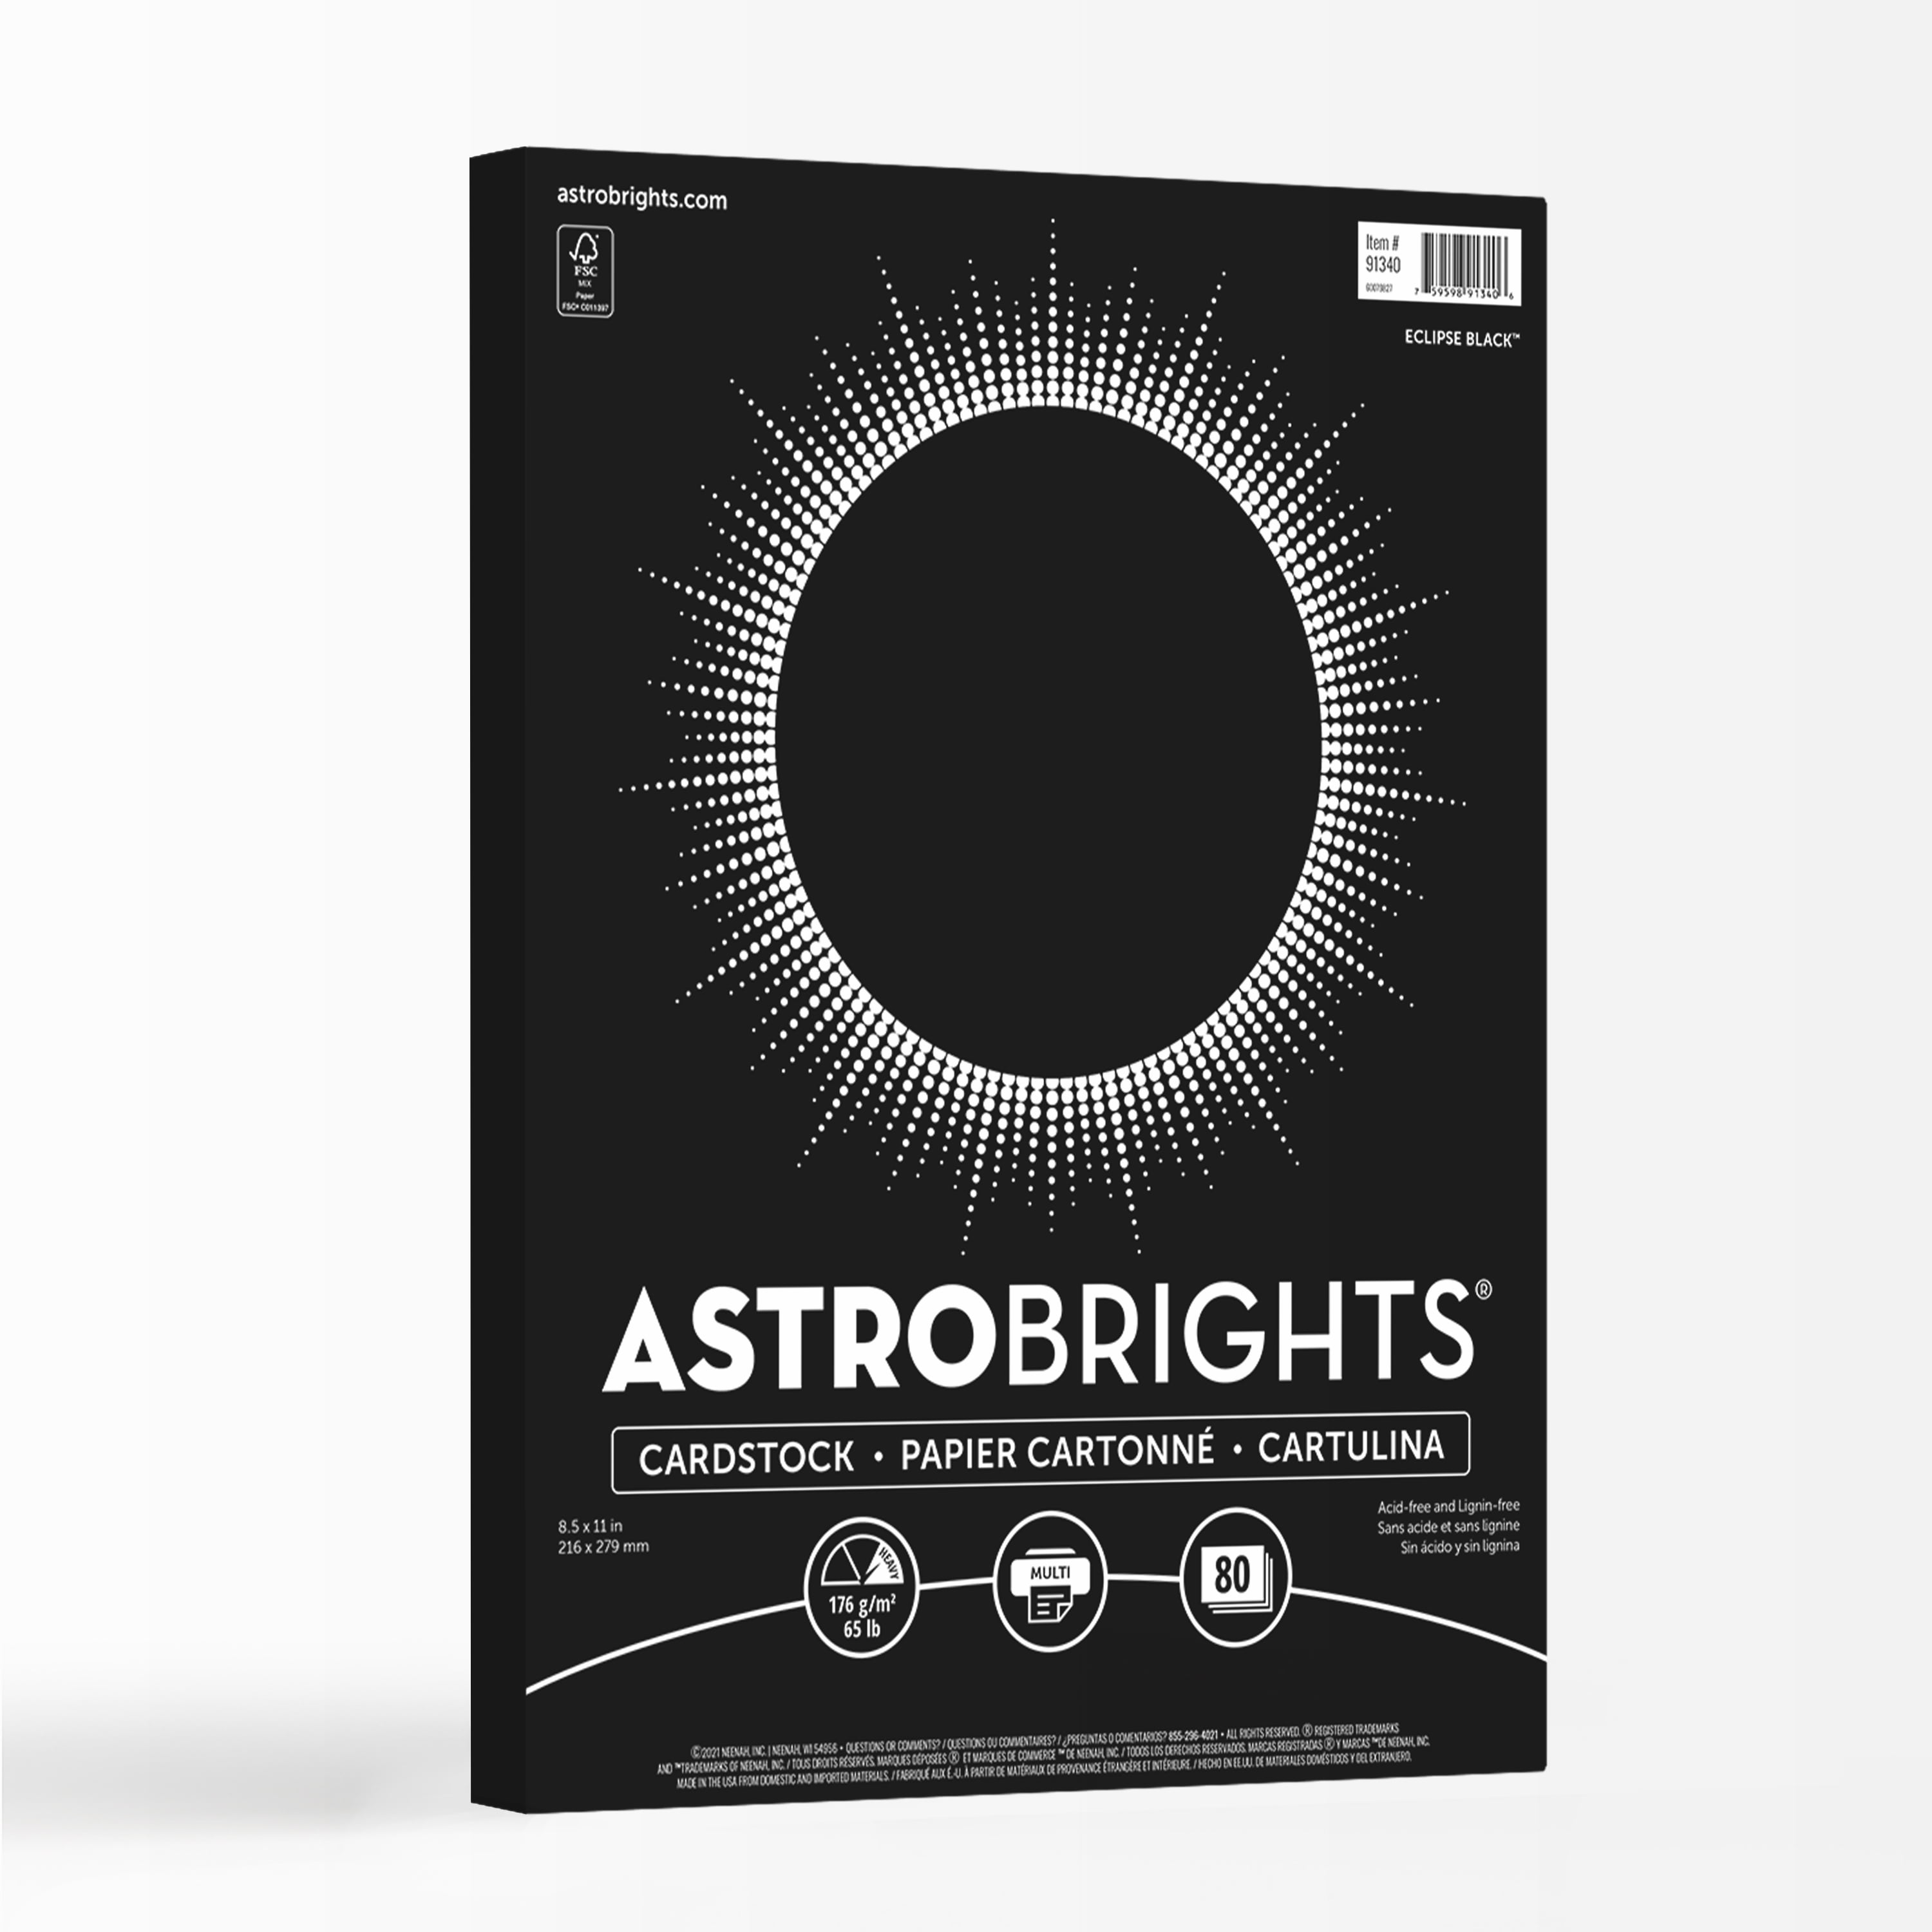 Astrobrights Black Cardstock Paper, 65 lbs., 8.5" x 11", 80 Sheets